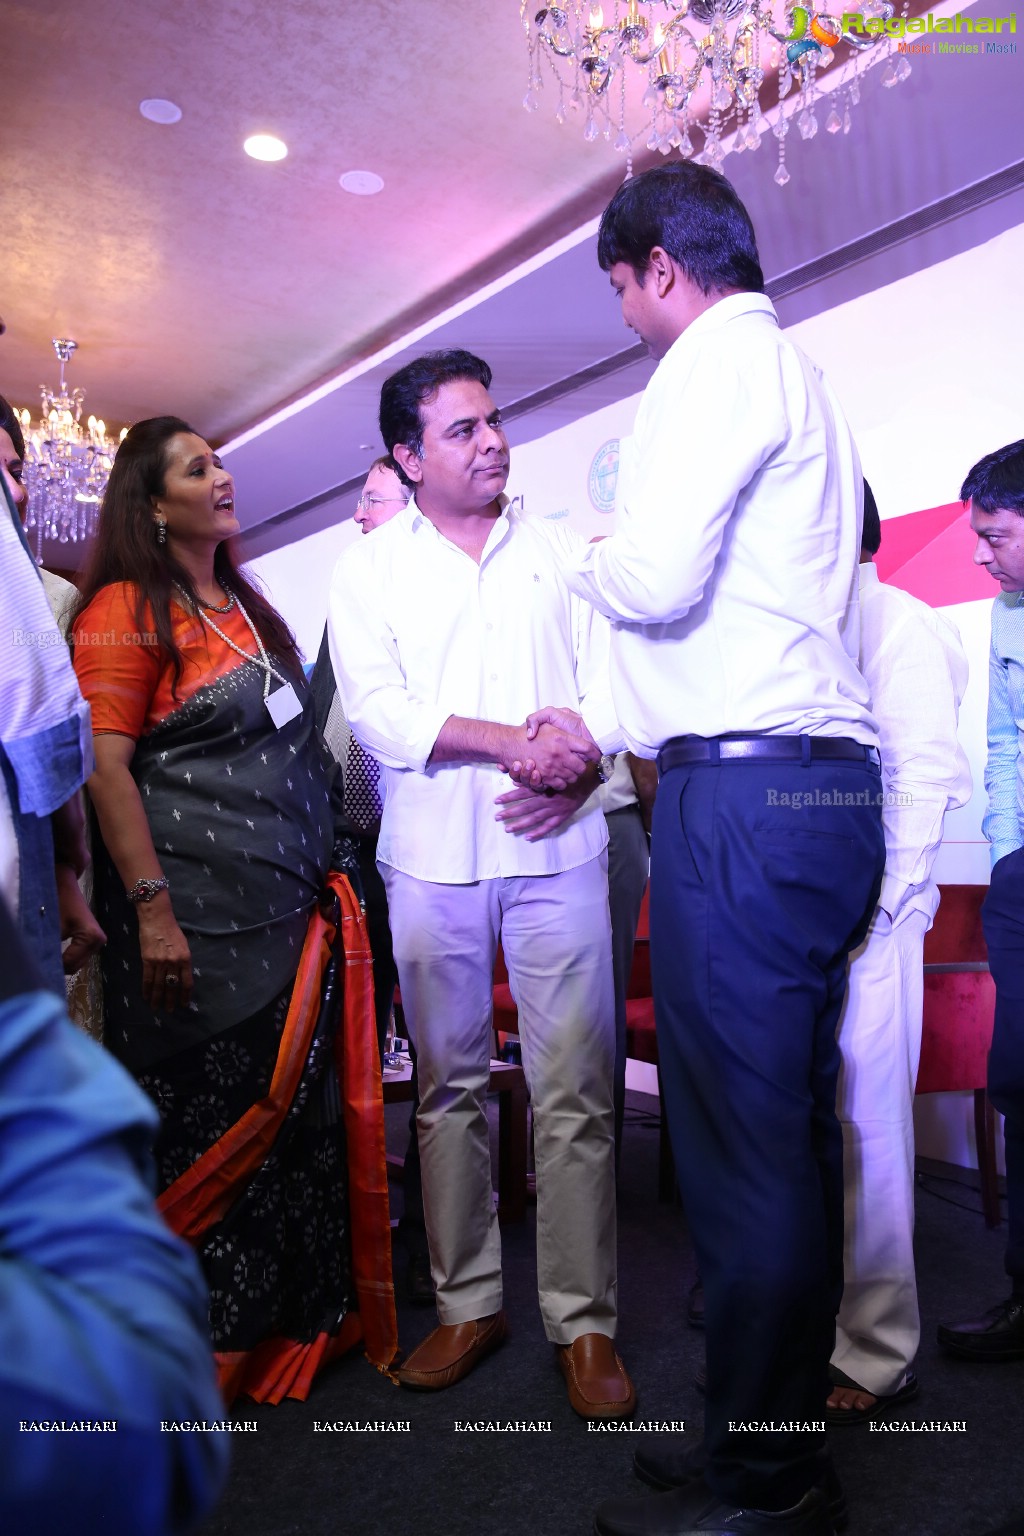 KT Rama Rao launches FLO TSIIC Industrial Park and handed over land allotment letters to 18 FLO Women Entrepreneurs